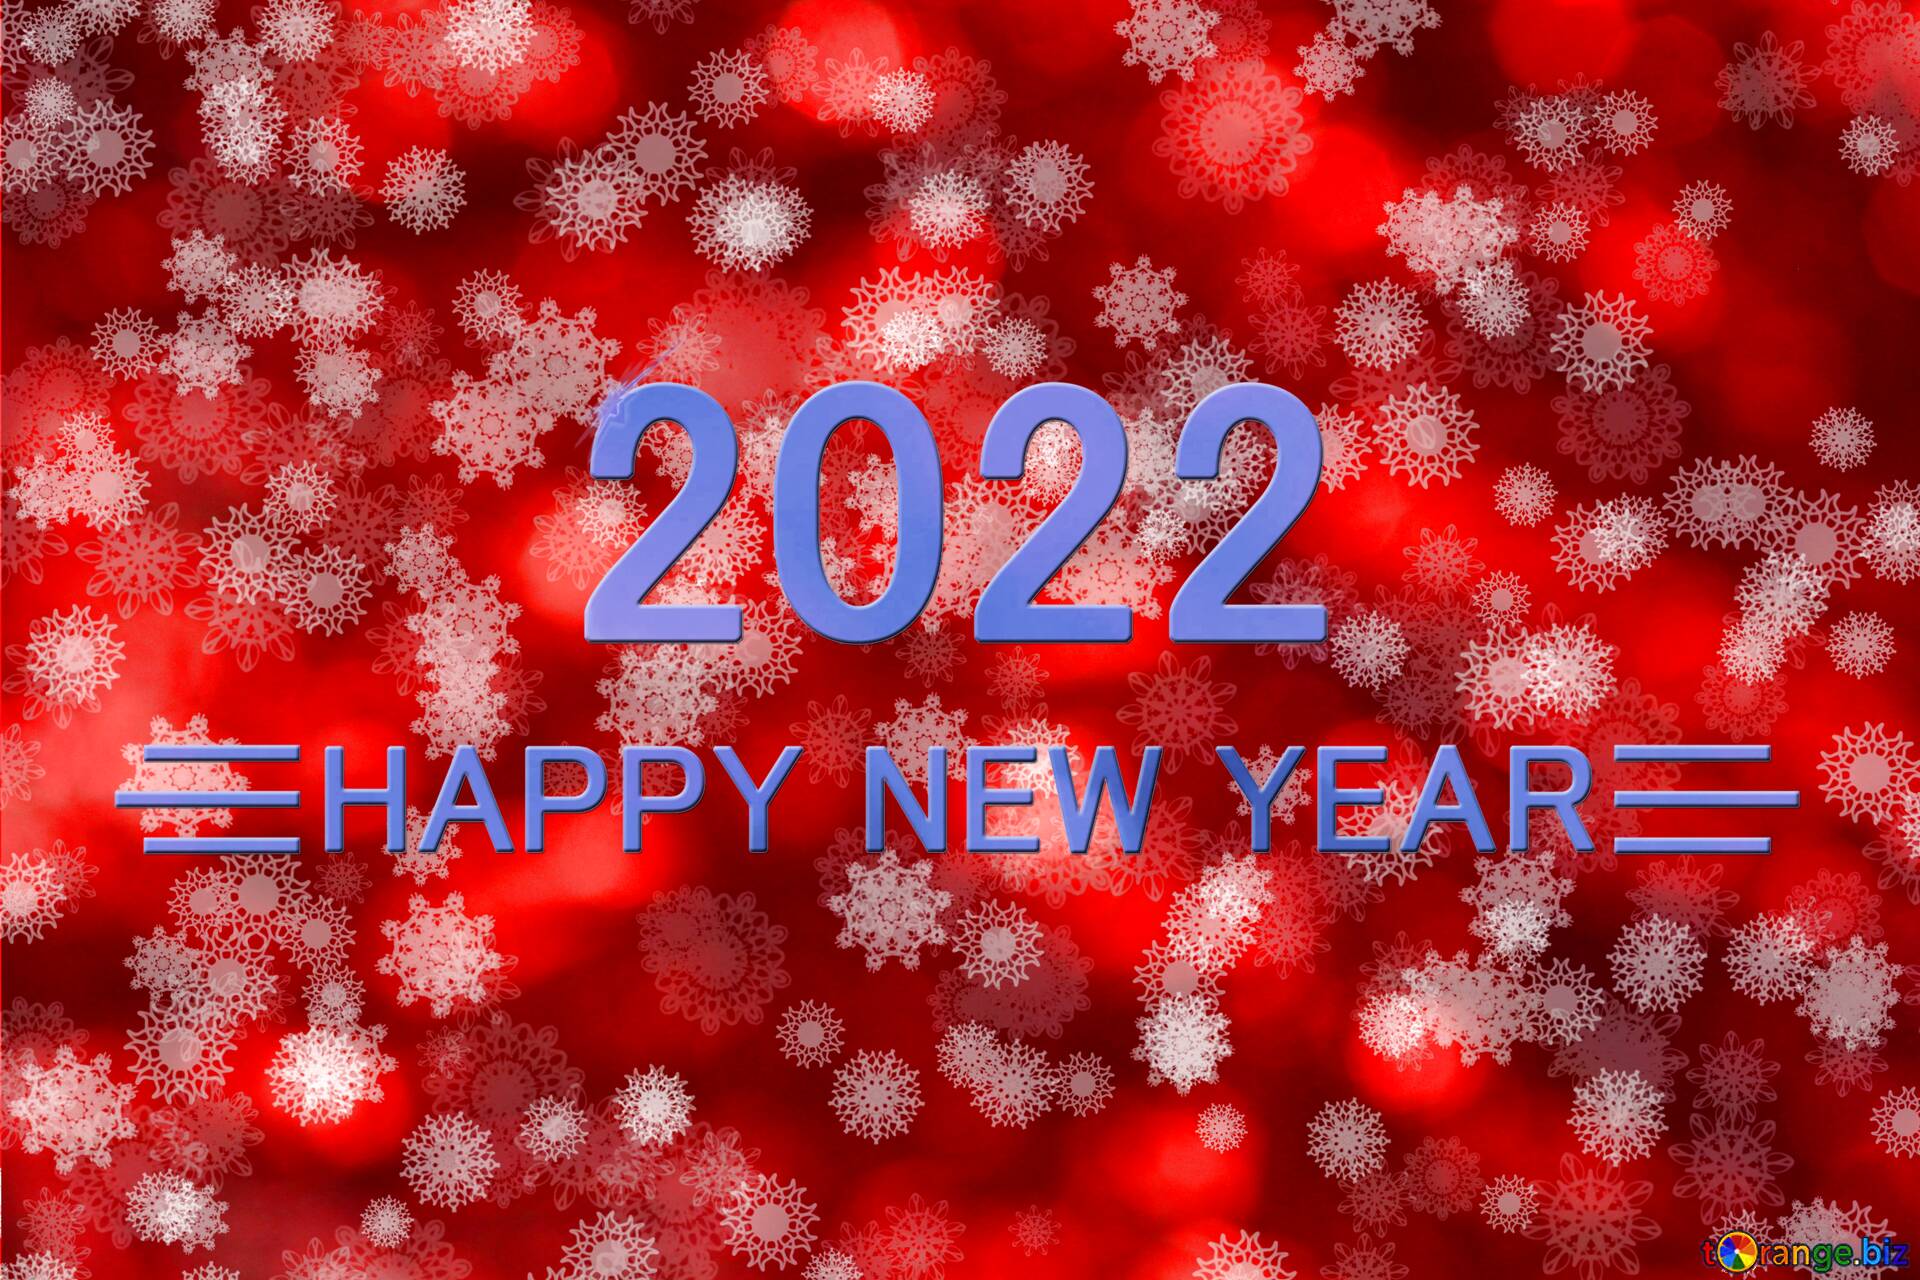 Download free picture Background Christmas and Happy New Year 2022 Blue